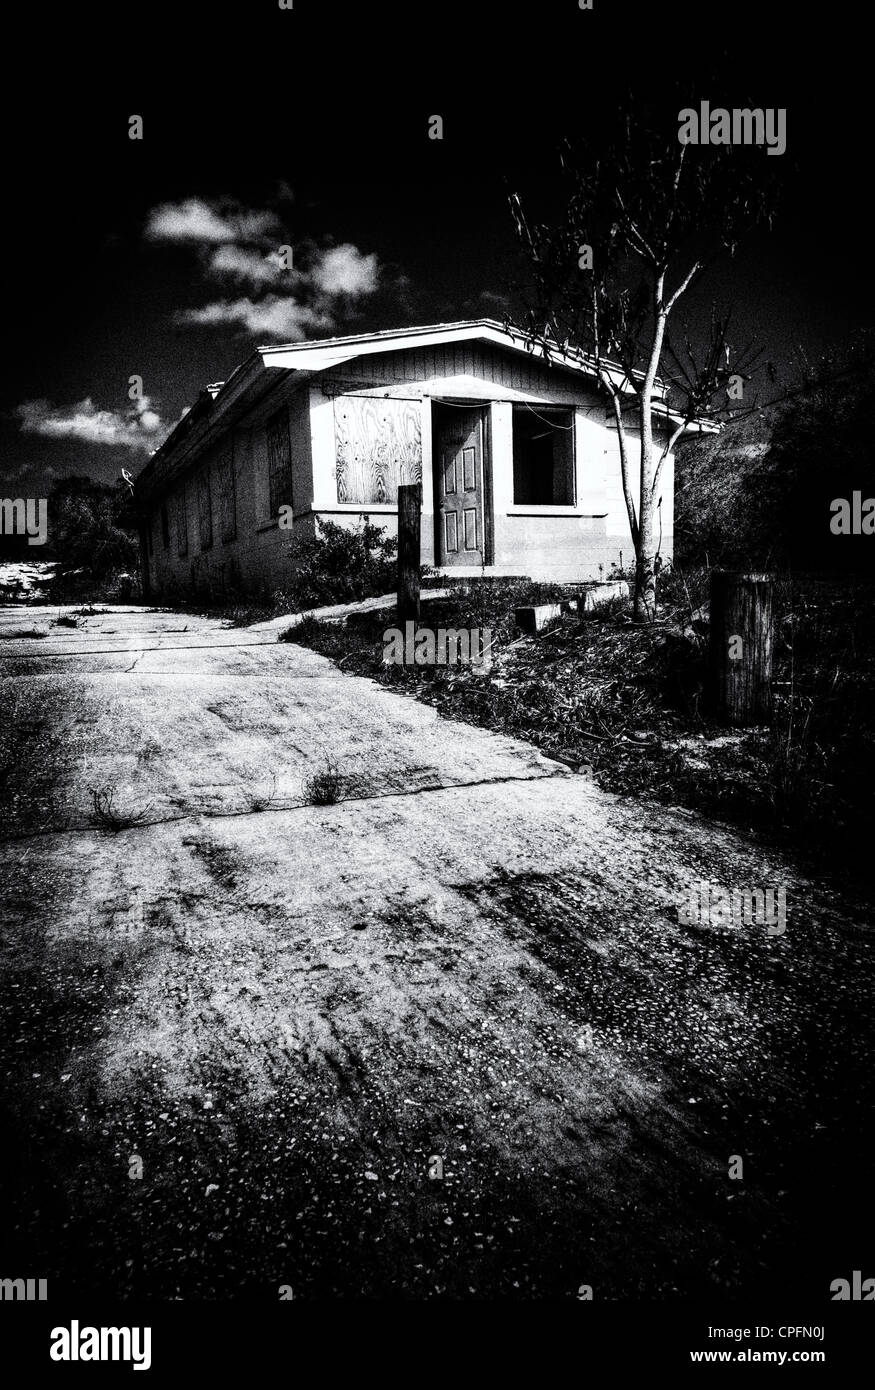 A creepy abandoned house in black and white Stock Photo